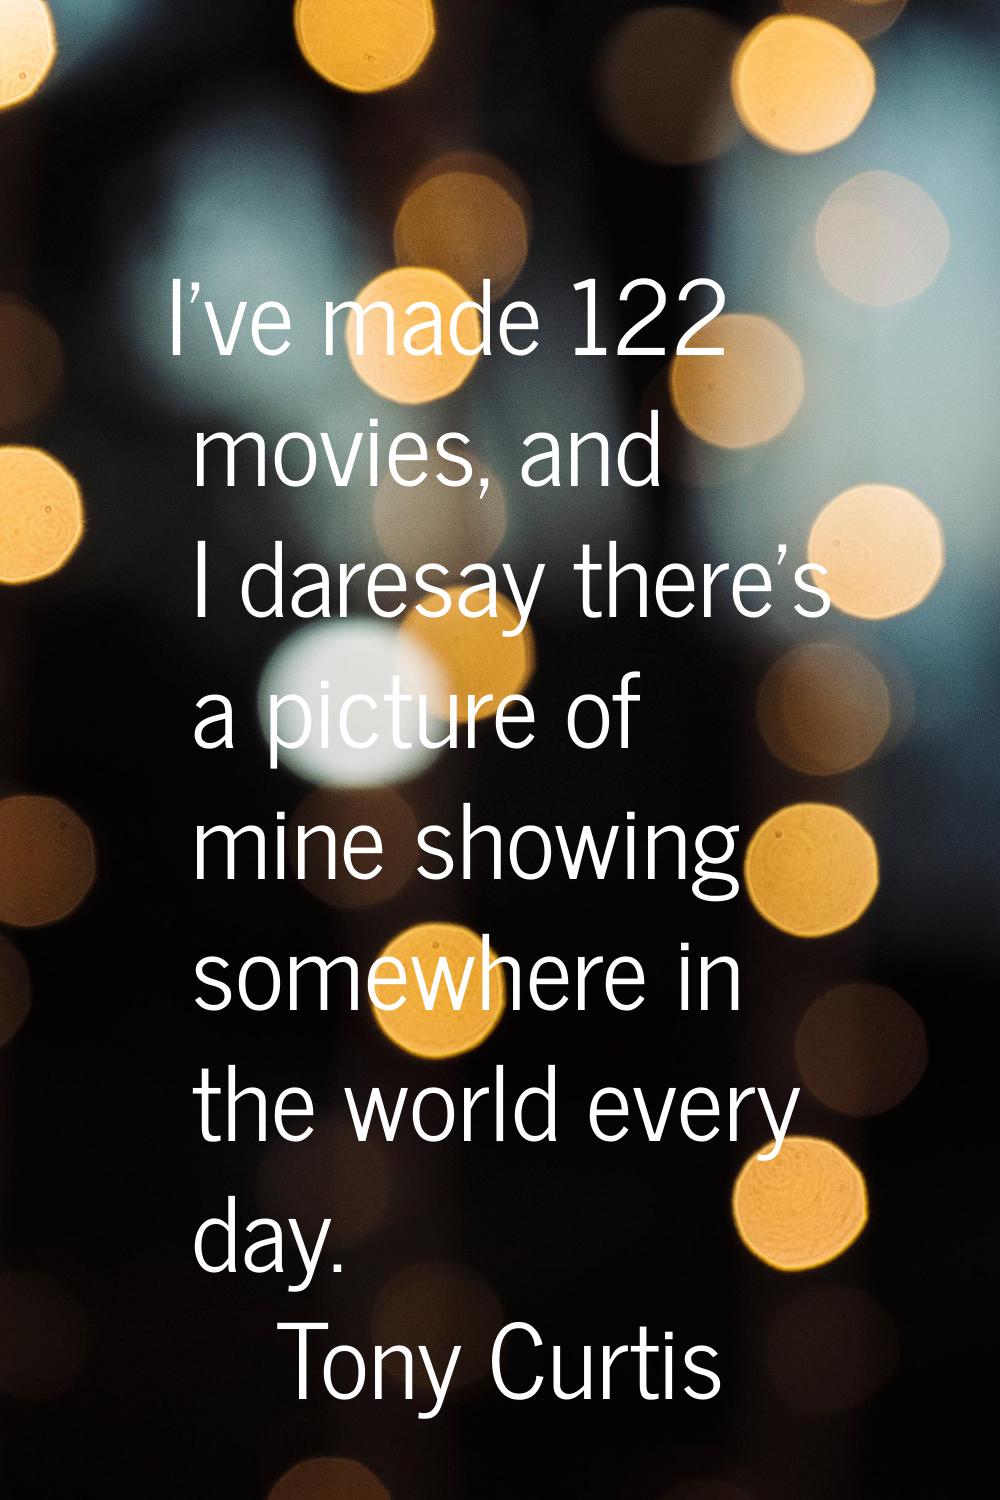 I've made 122 movies, and I daresay there's a picture of mine showing somewhere in the world every 